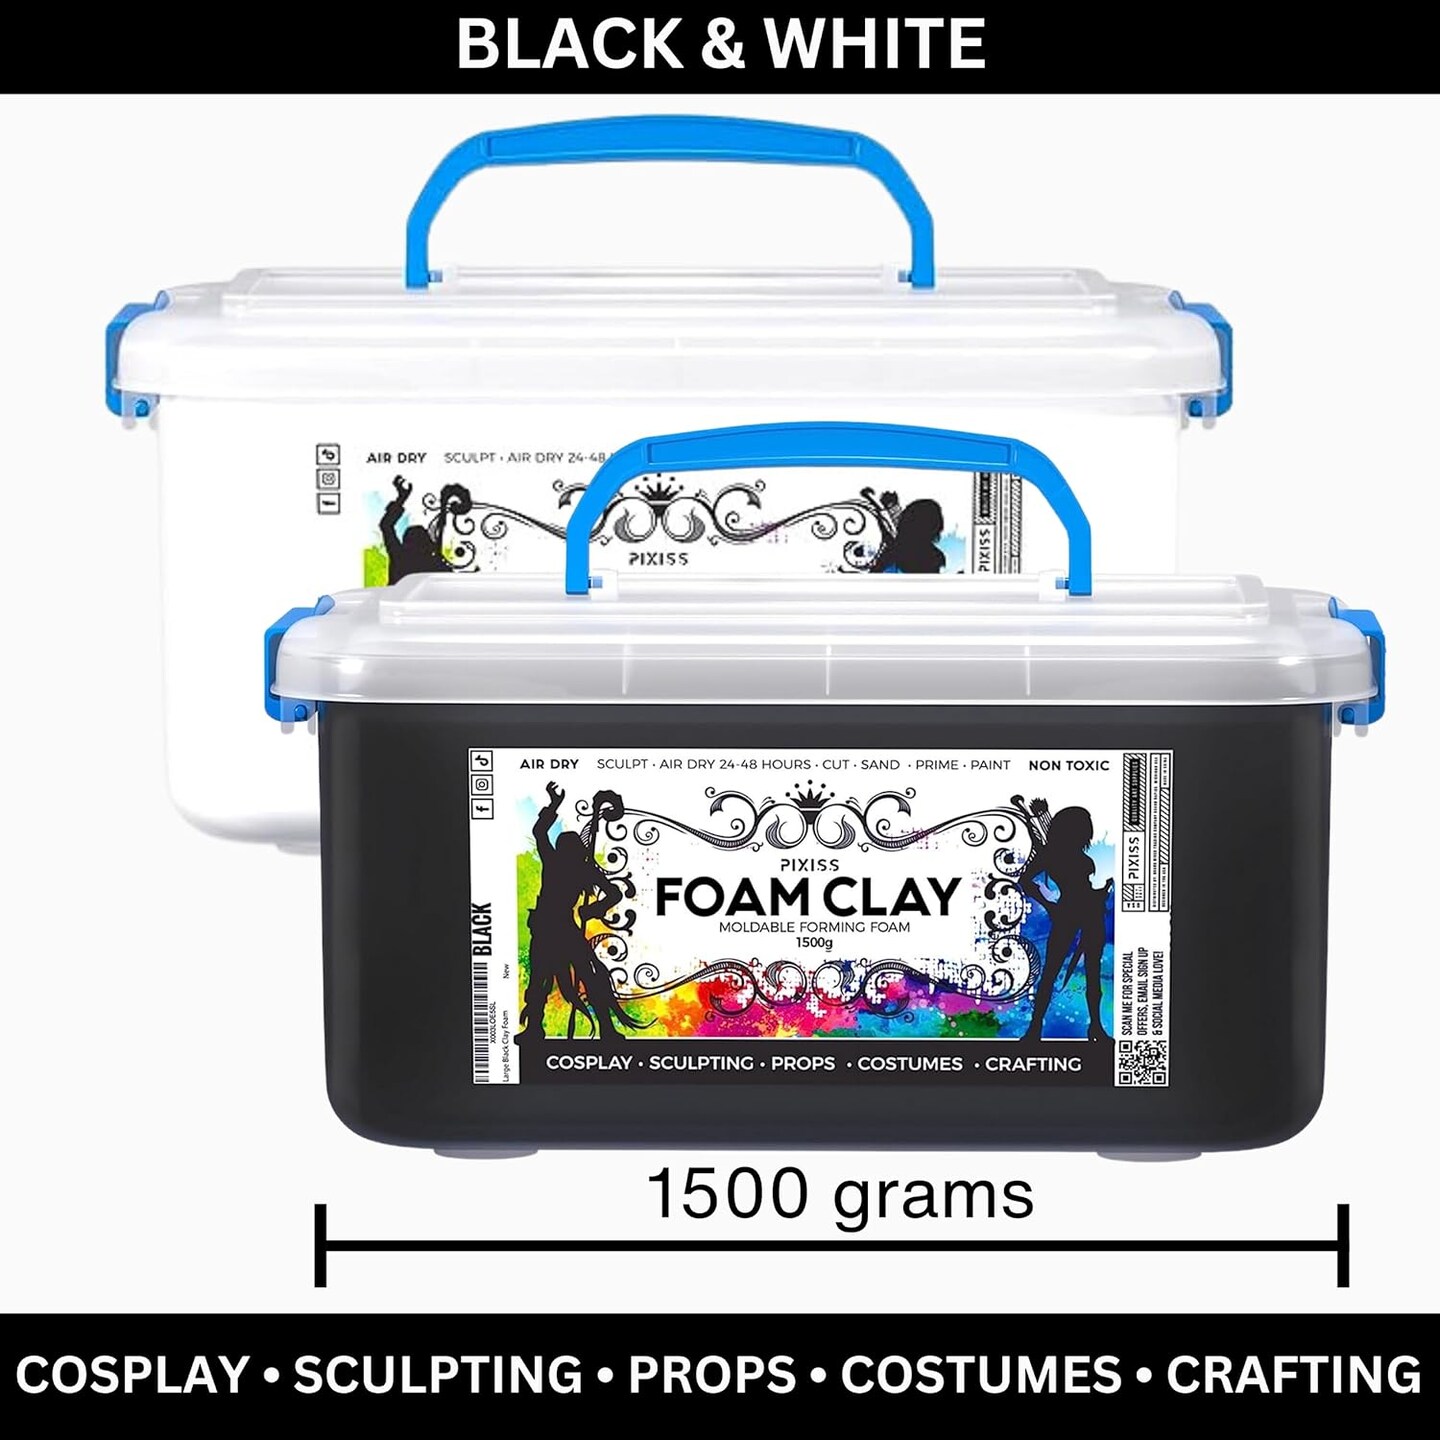 Moldable Cosplay Foam Clay (Gray) - Premium Modeling Foam Clay Air